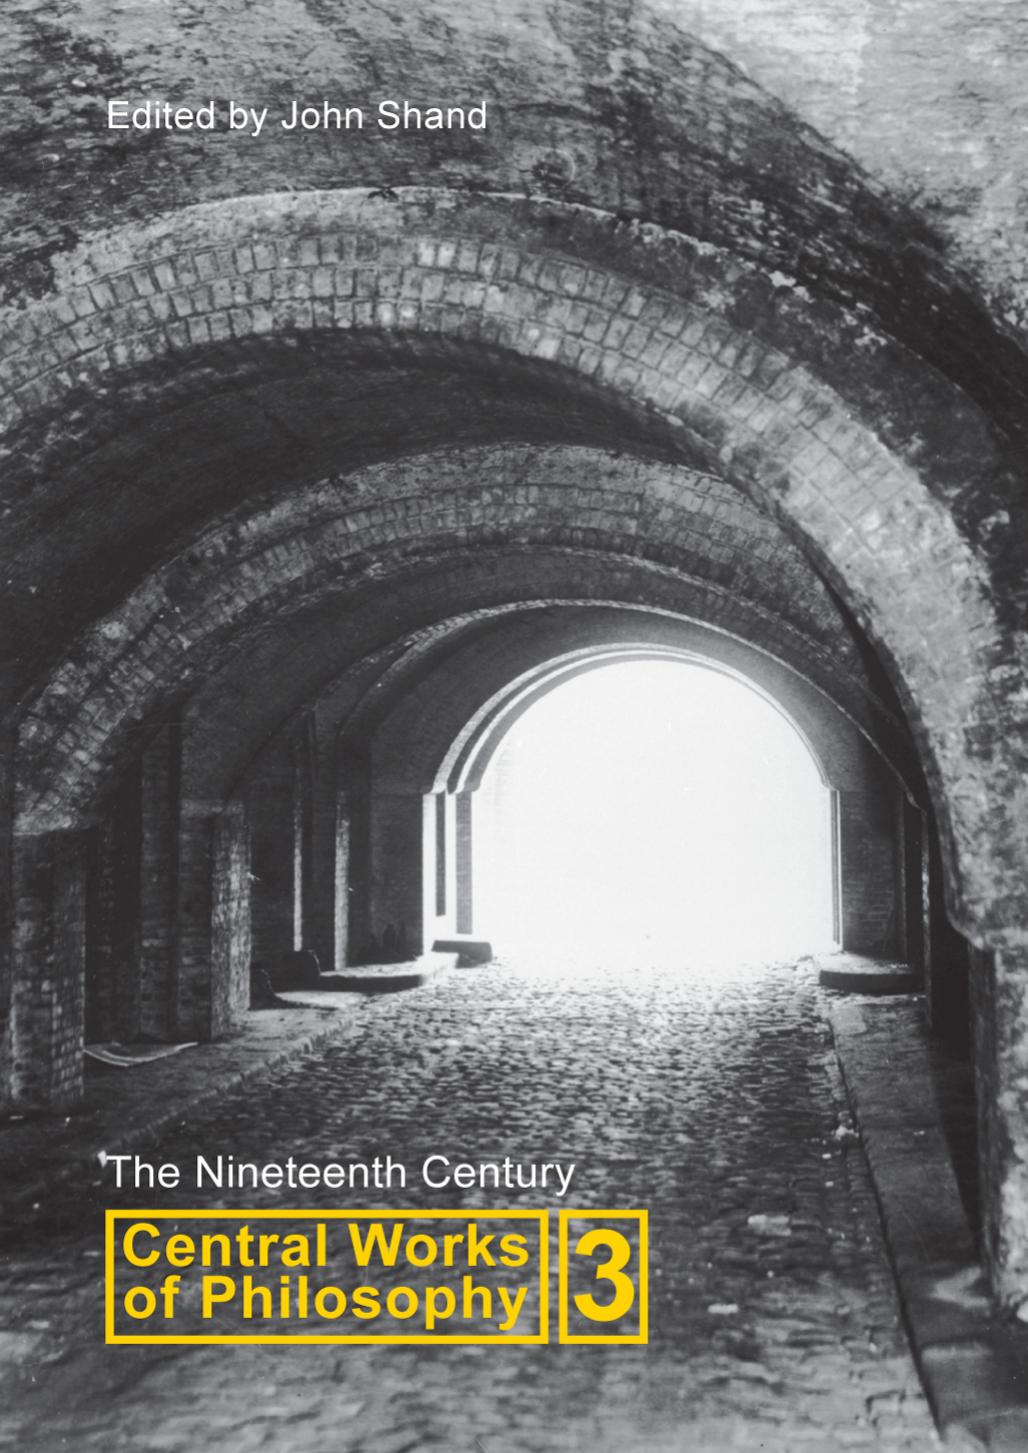 Central Works of Philosophy: The Nineteenth Century